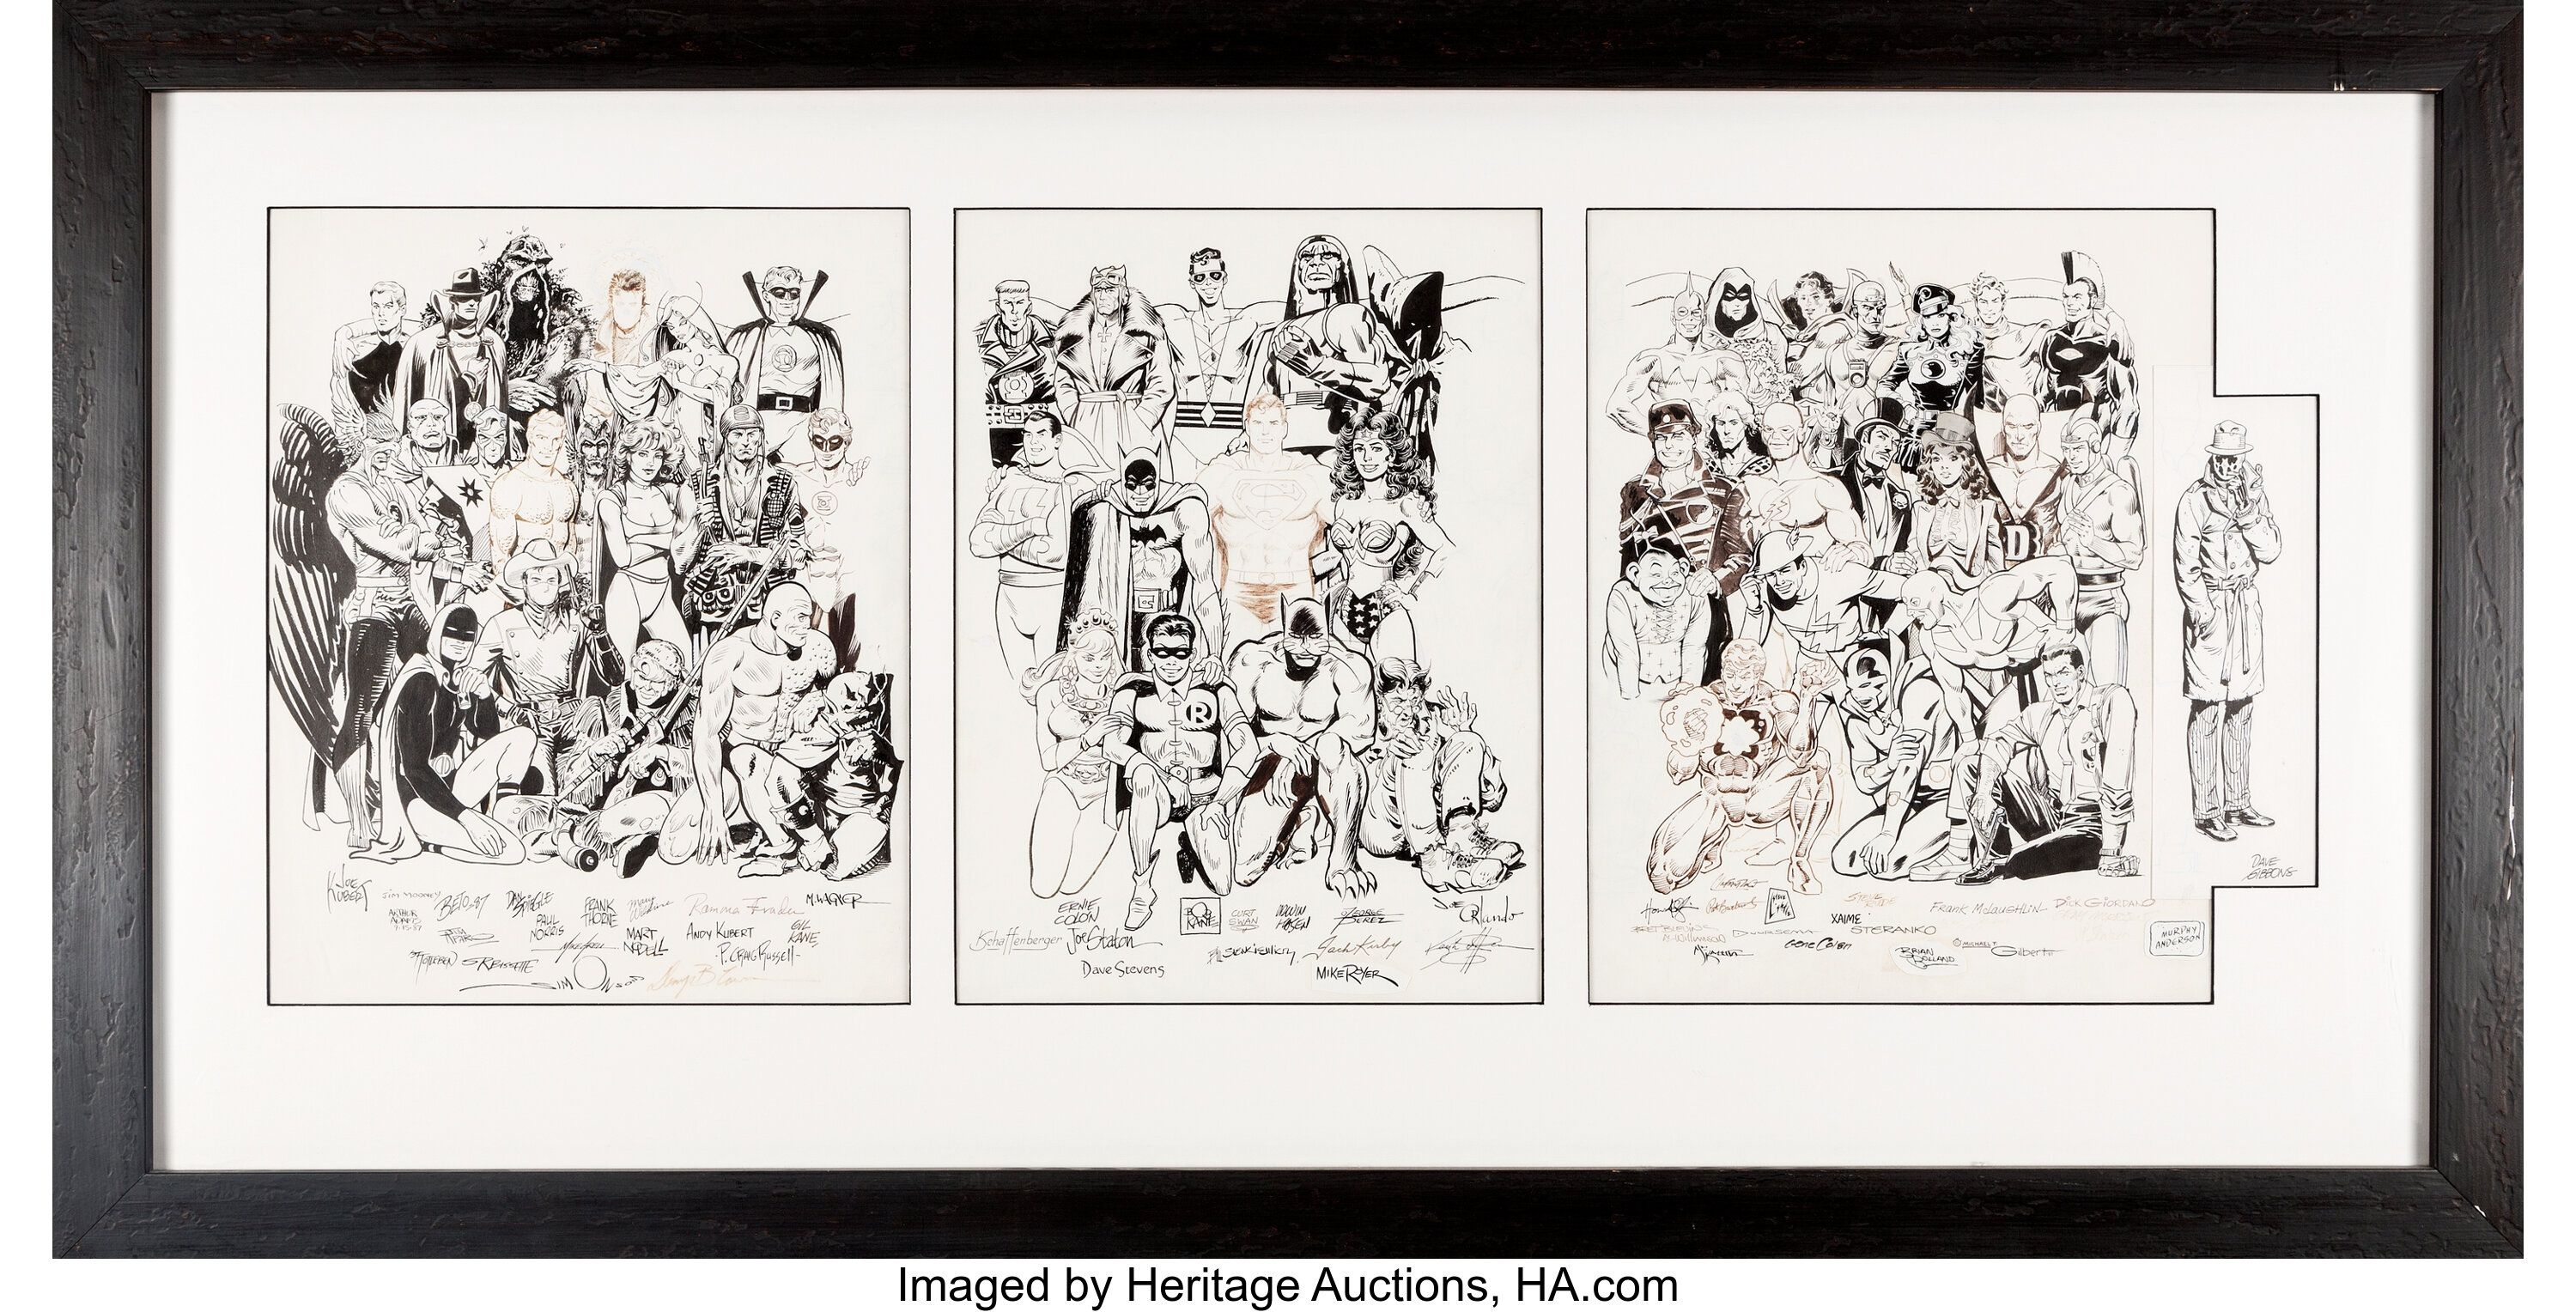 History of the DC Universe Hardcover Collection Gatefold Poster Jam Illustration Original Art Heritage Auctions 1